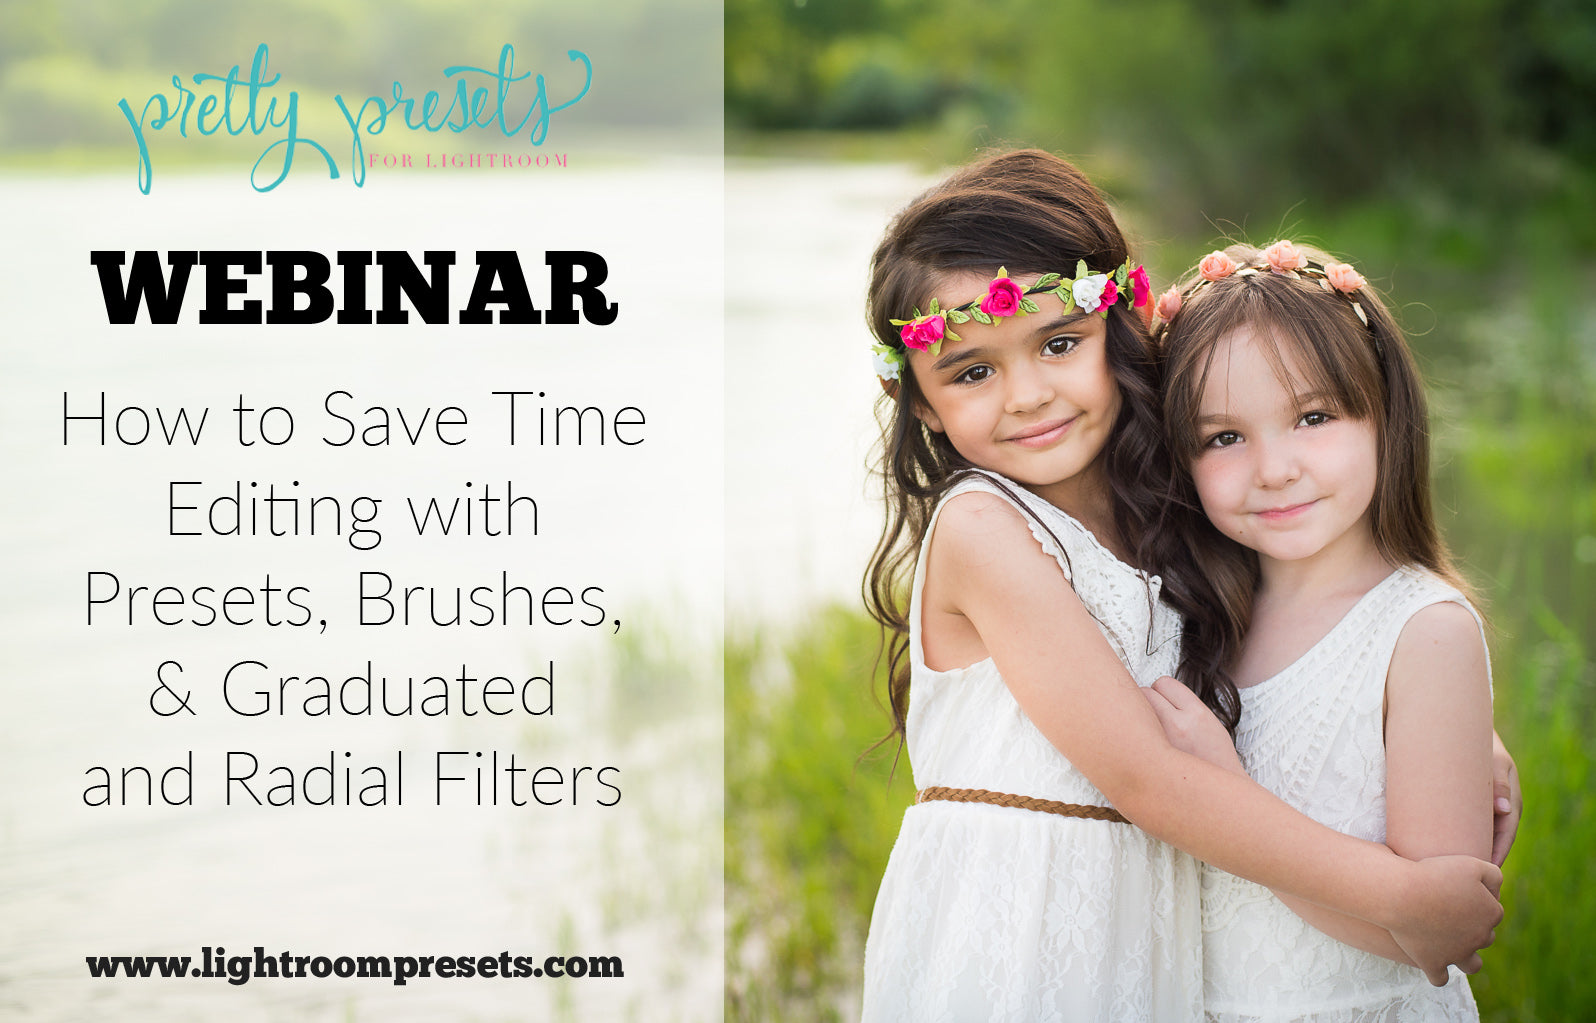 How to Save Time Using Lightroom Presets and Brushes